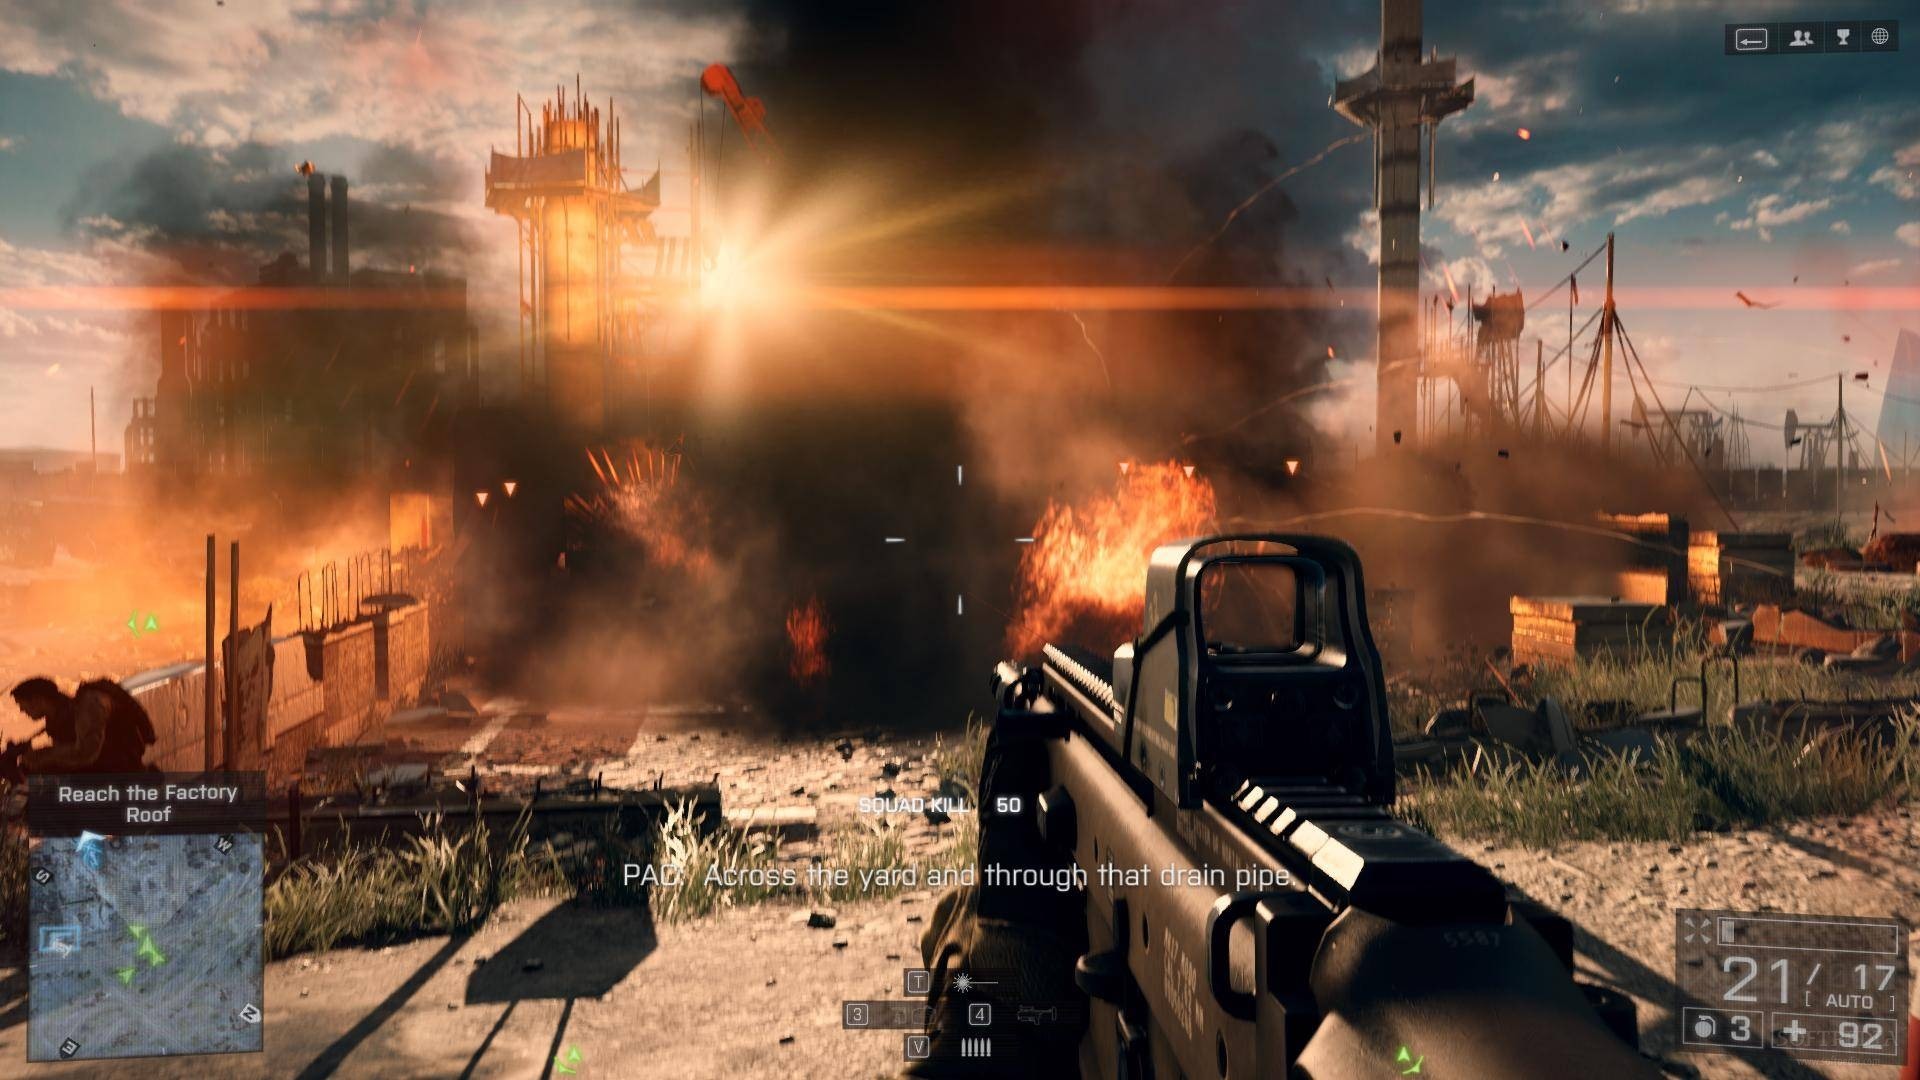 DICE Officially Launches Mantle Update For Battlefield 4 - 1.23 GB